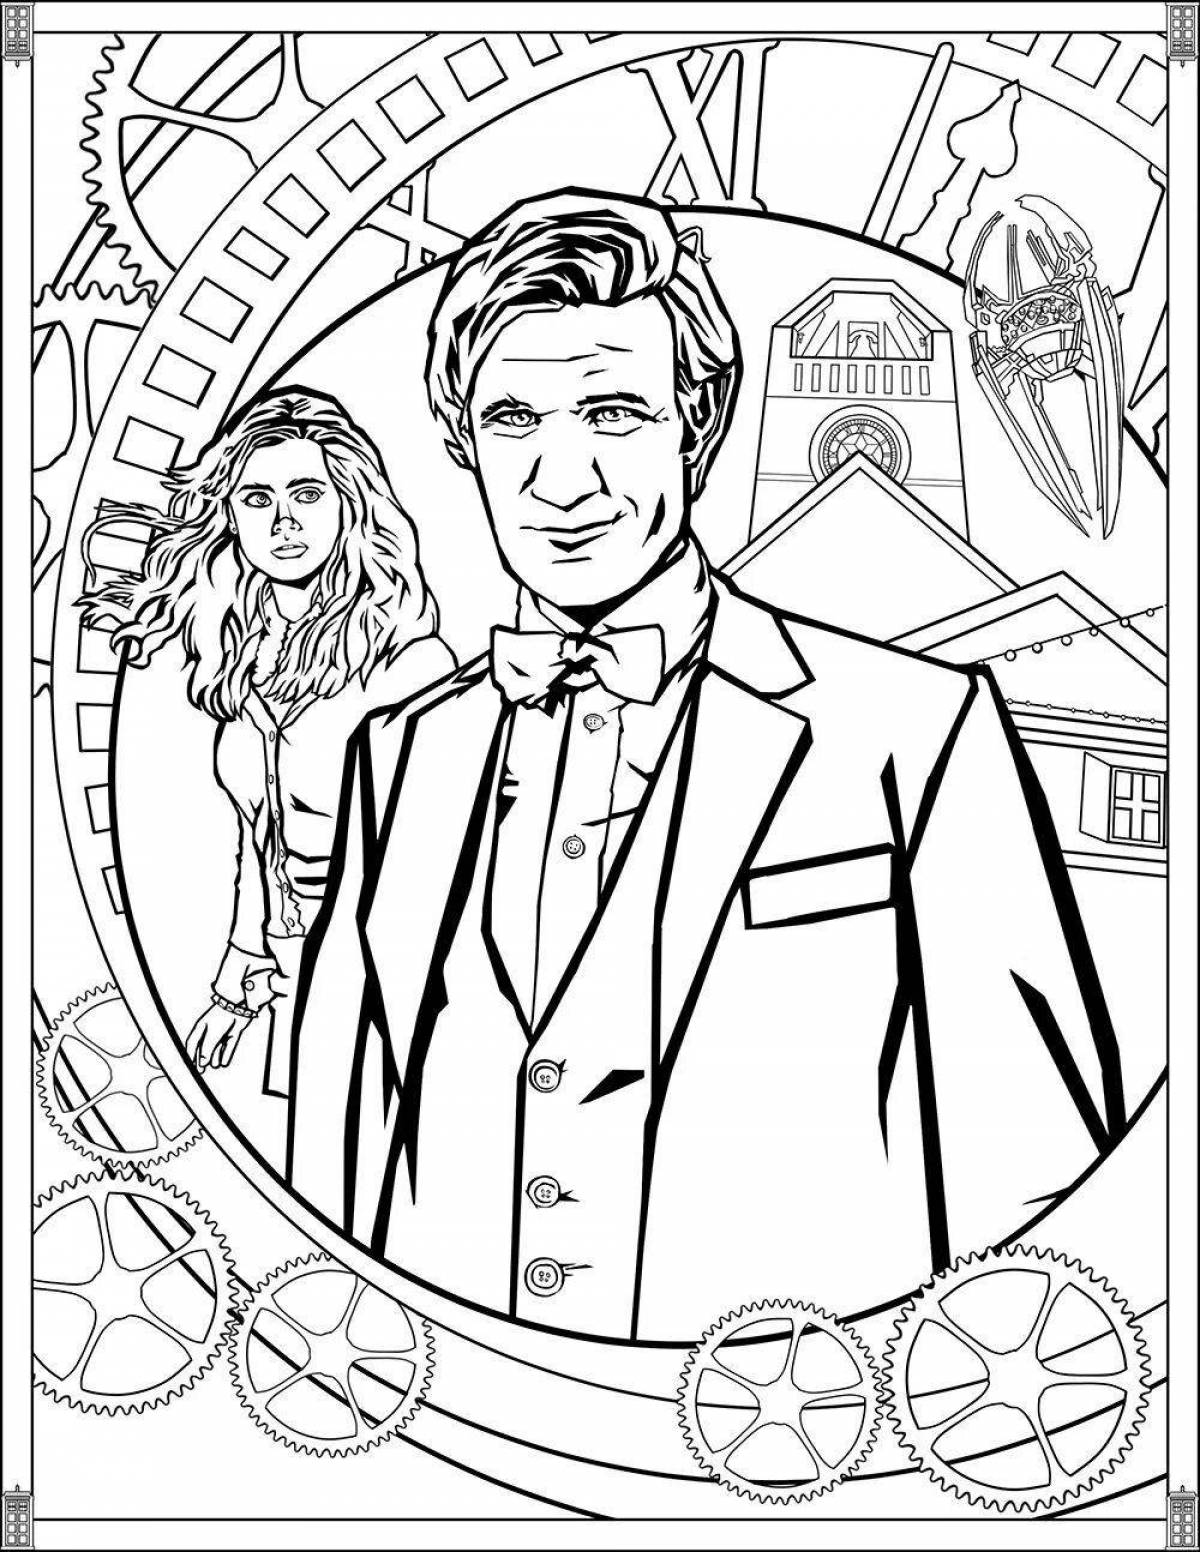 Comic doctor who coloring book